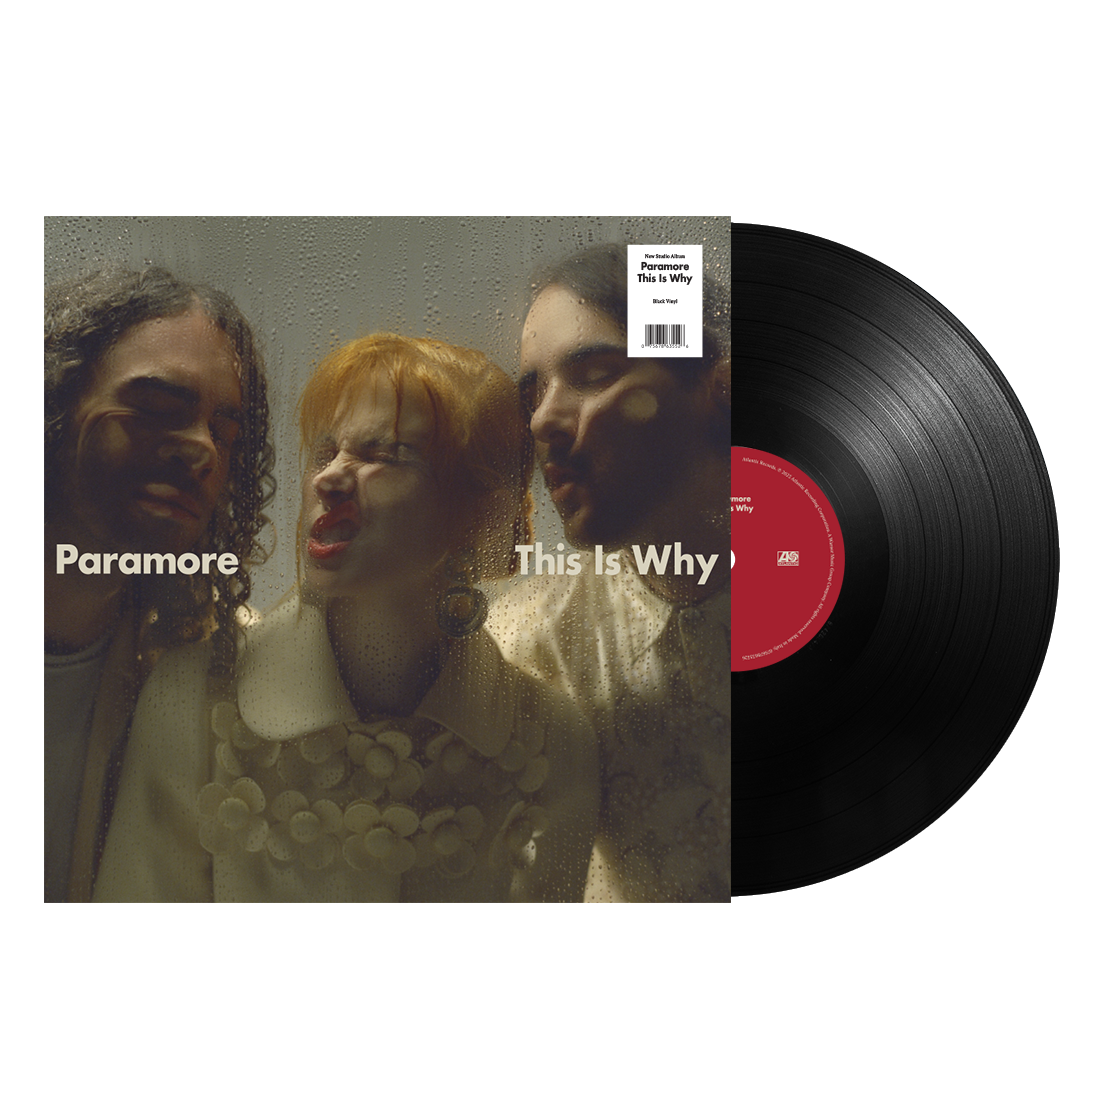 Gripsweat - PARAMORE VINYL LP All We Know Is Falling Teal Riot